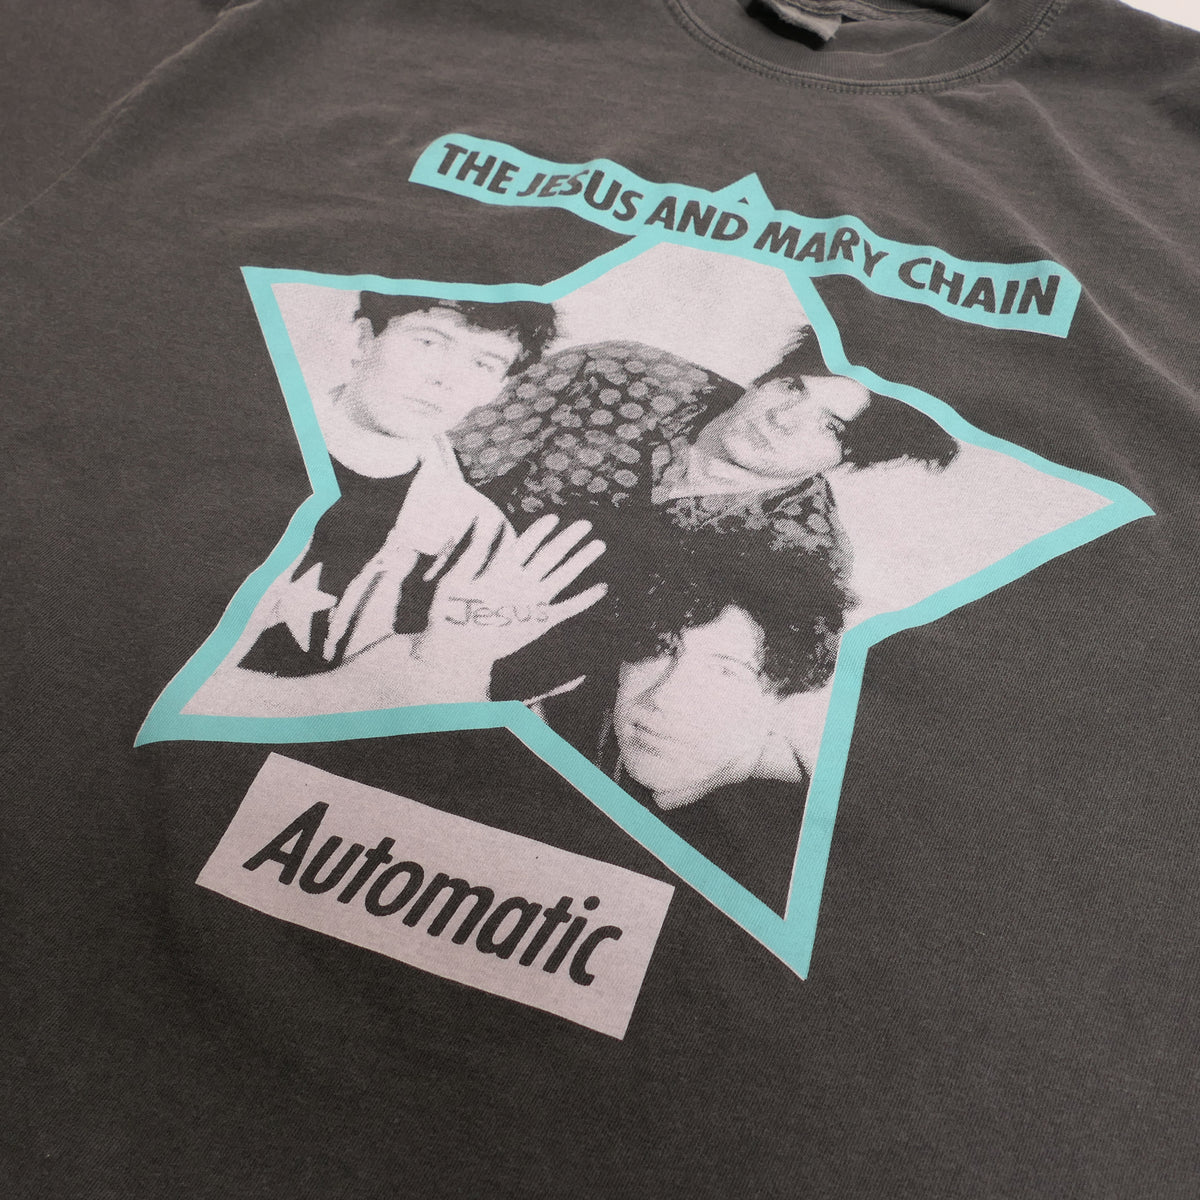 The Jesus And Mary Chain Automatic Tee